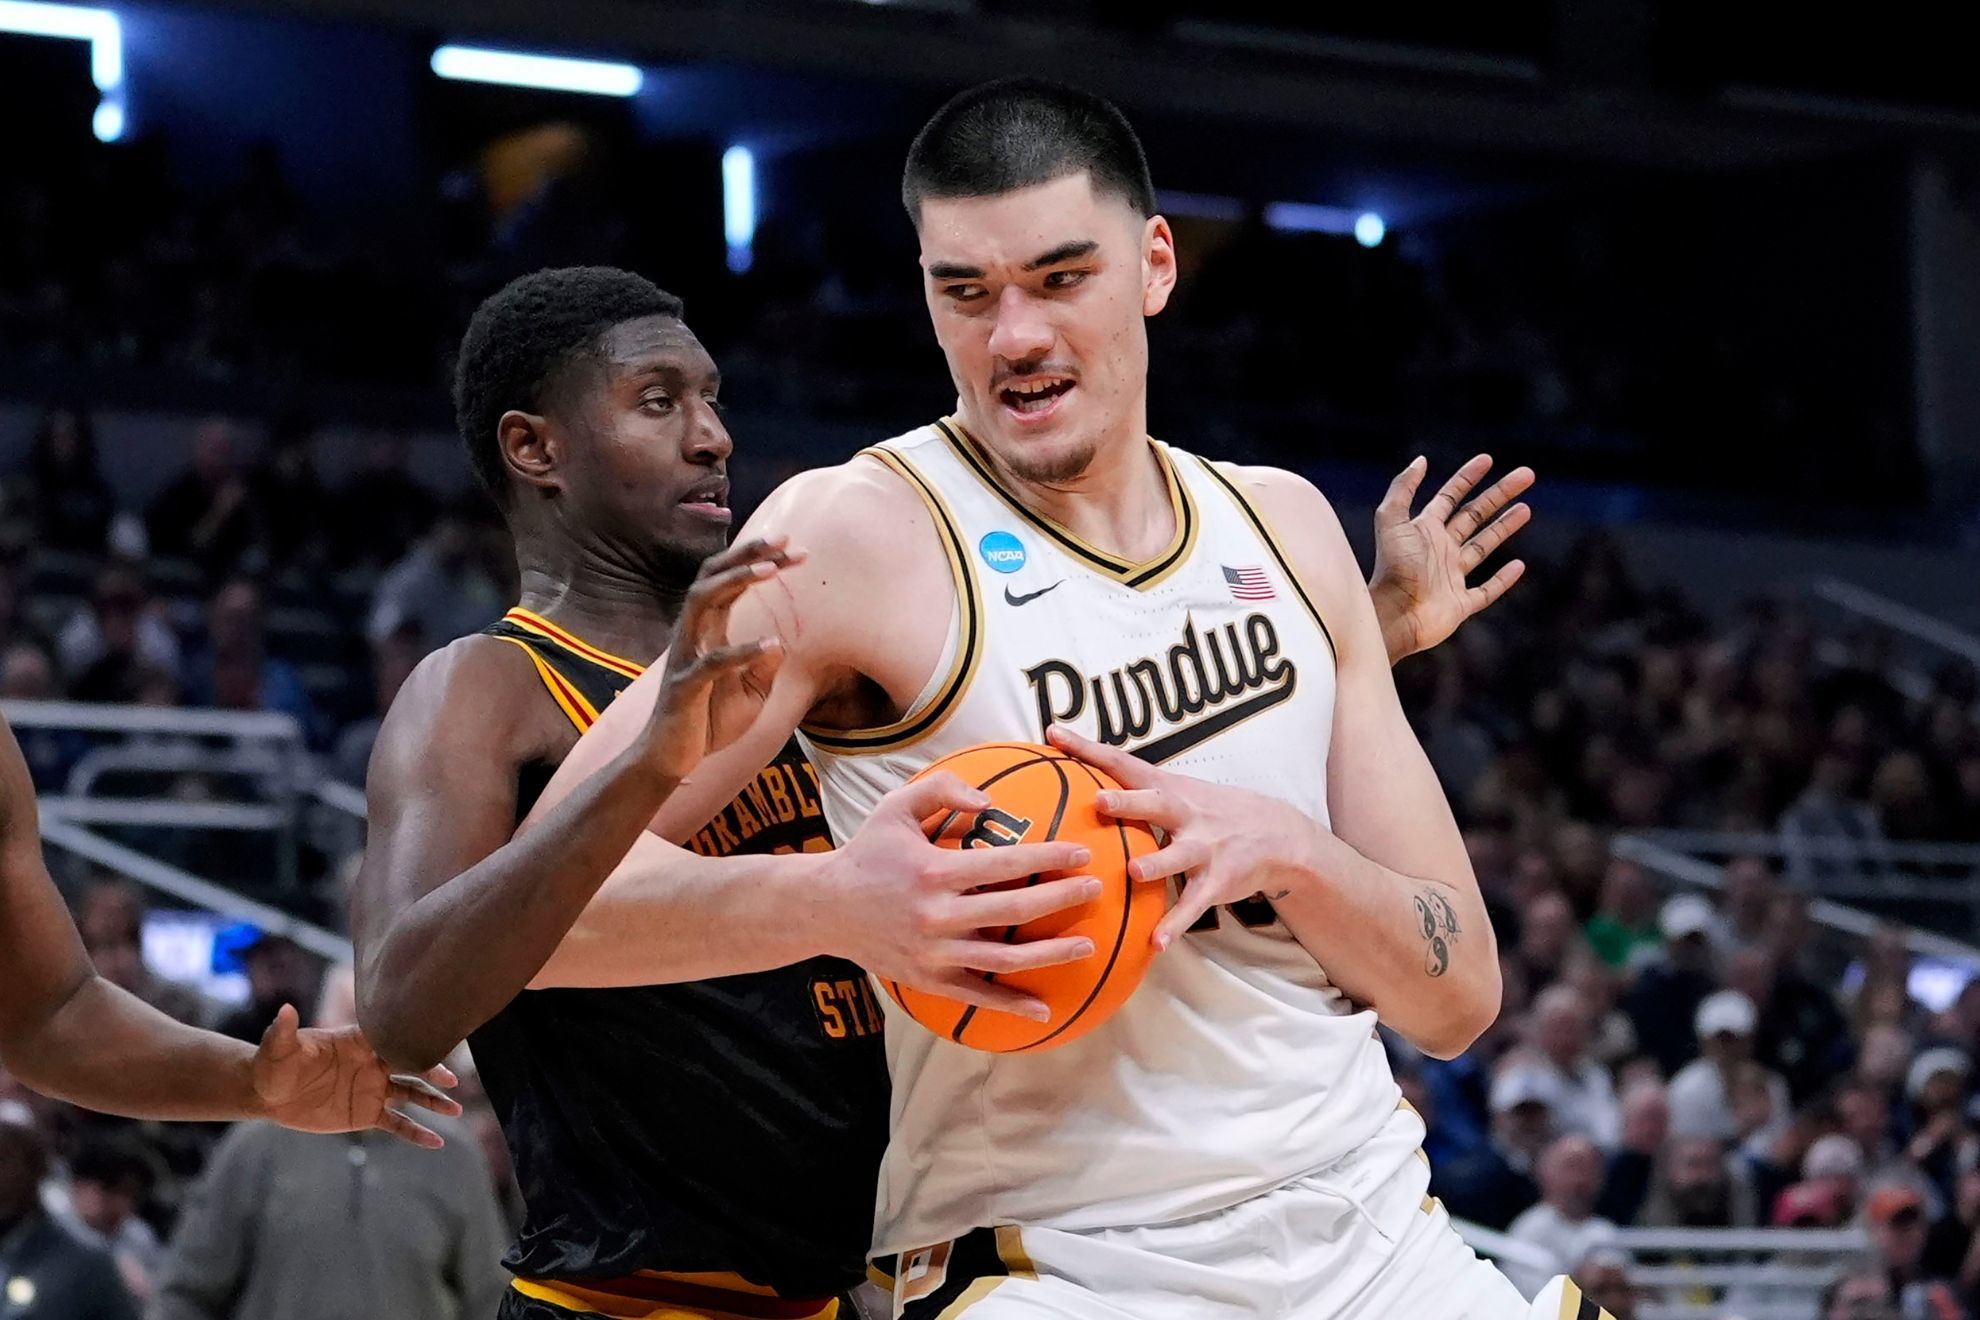 Zach Edey has first 30-20 March Madness game since 1995 as Purdue routs Grambling